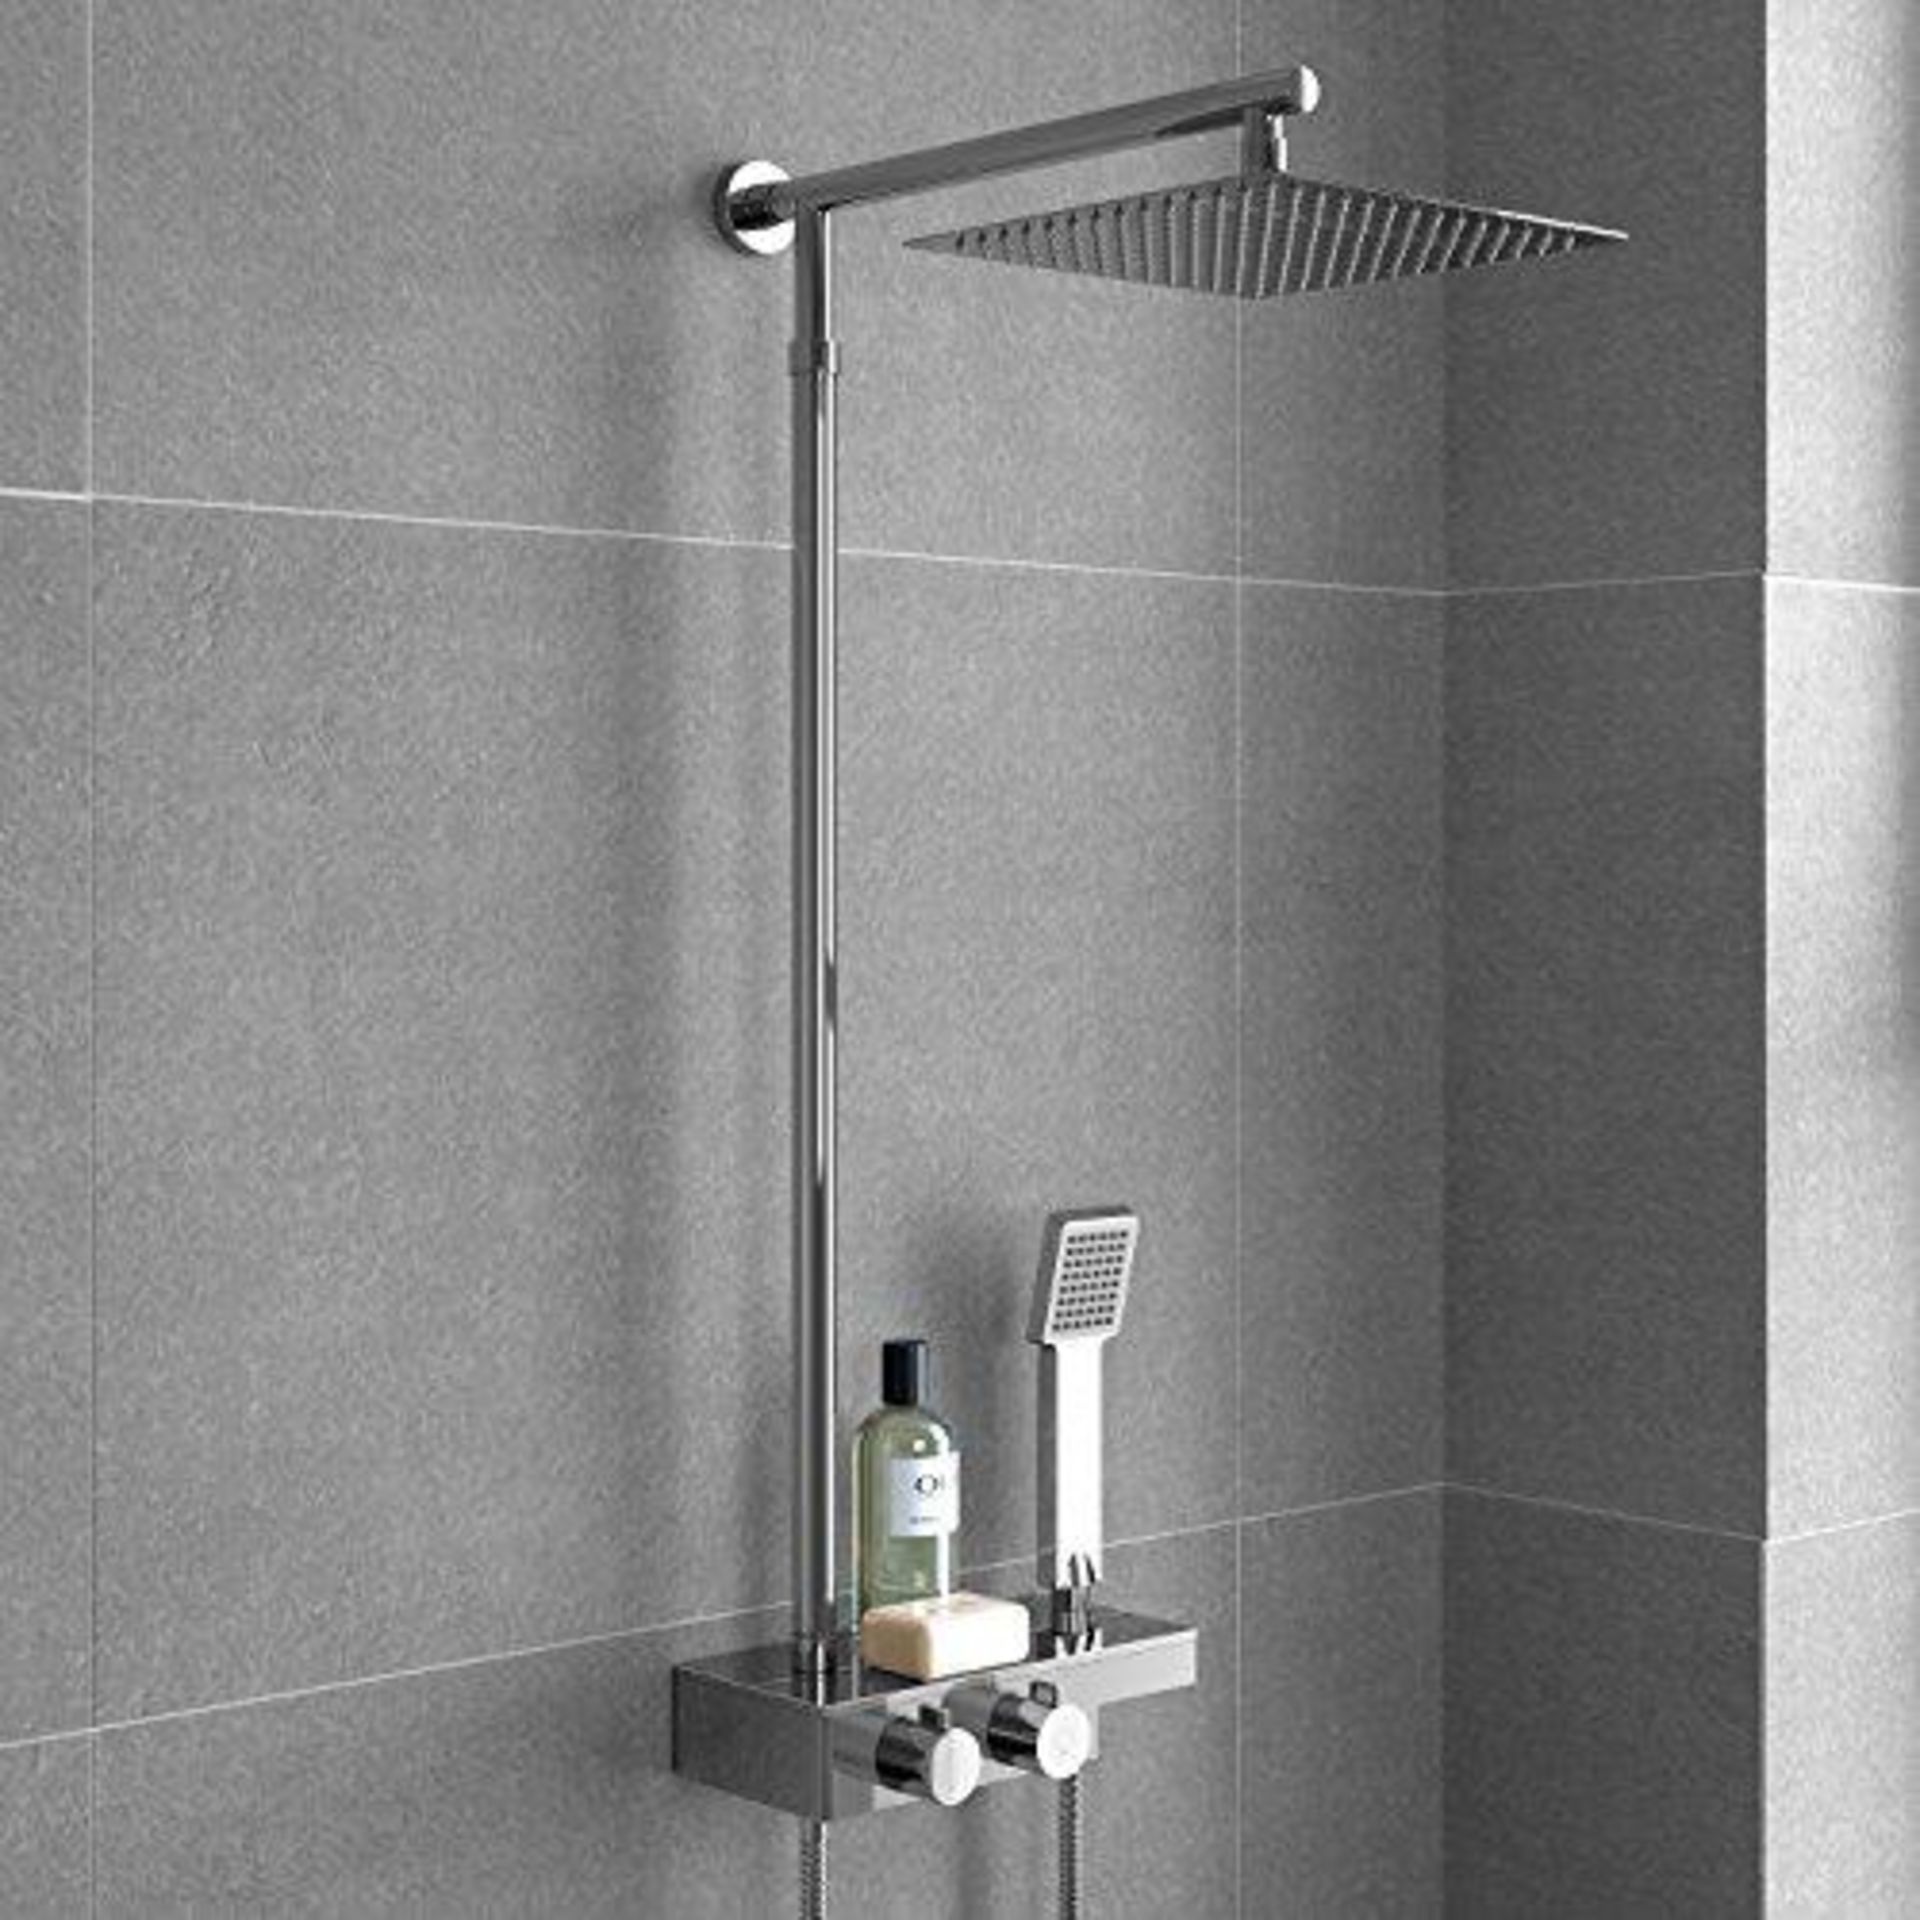 NEW & BOXED Square Thermostatic Bar Mixer Shower Set Valve with Shelf 10" Head + Handset. RRP ... - Image 2 of 3